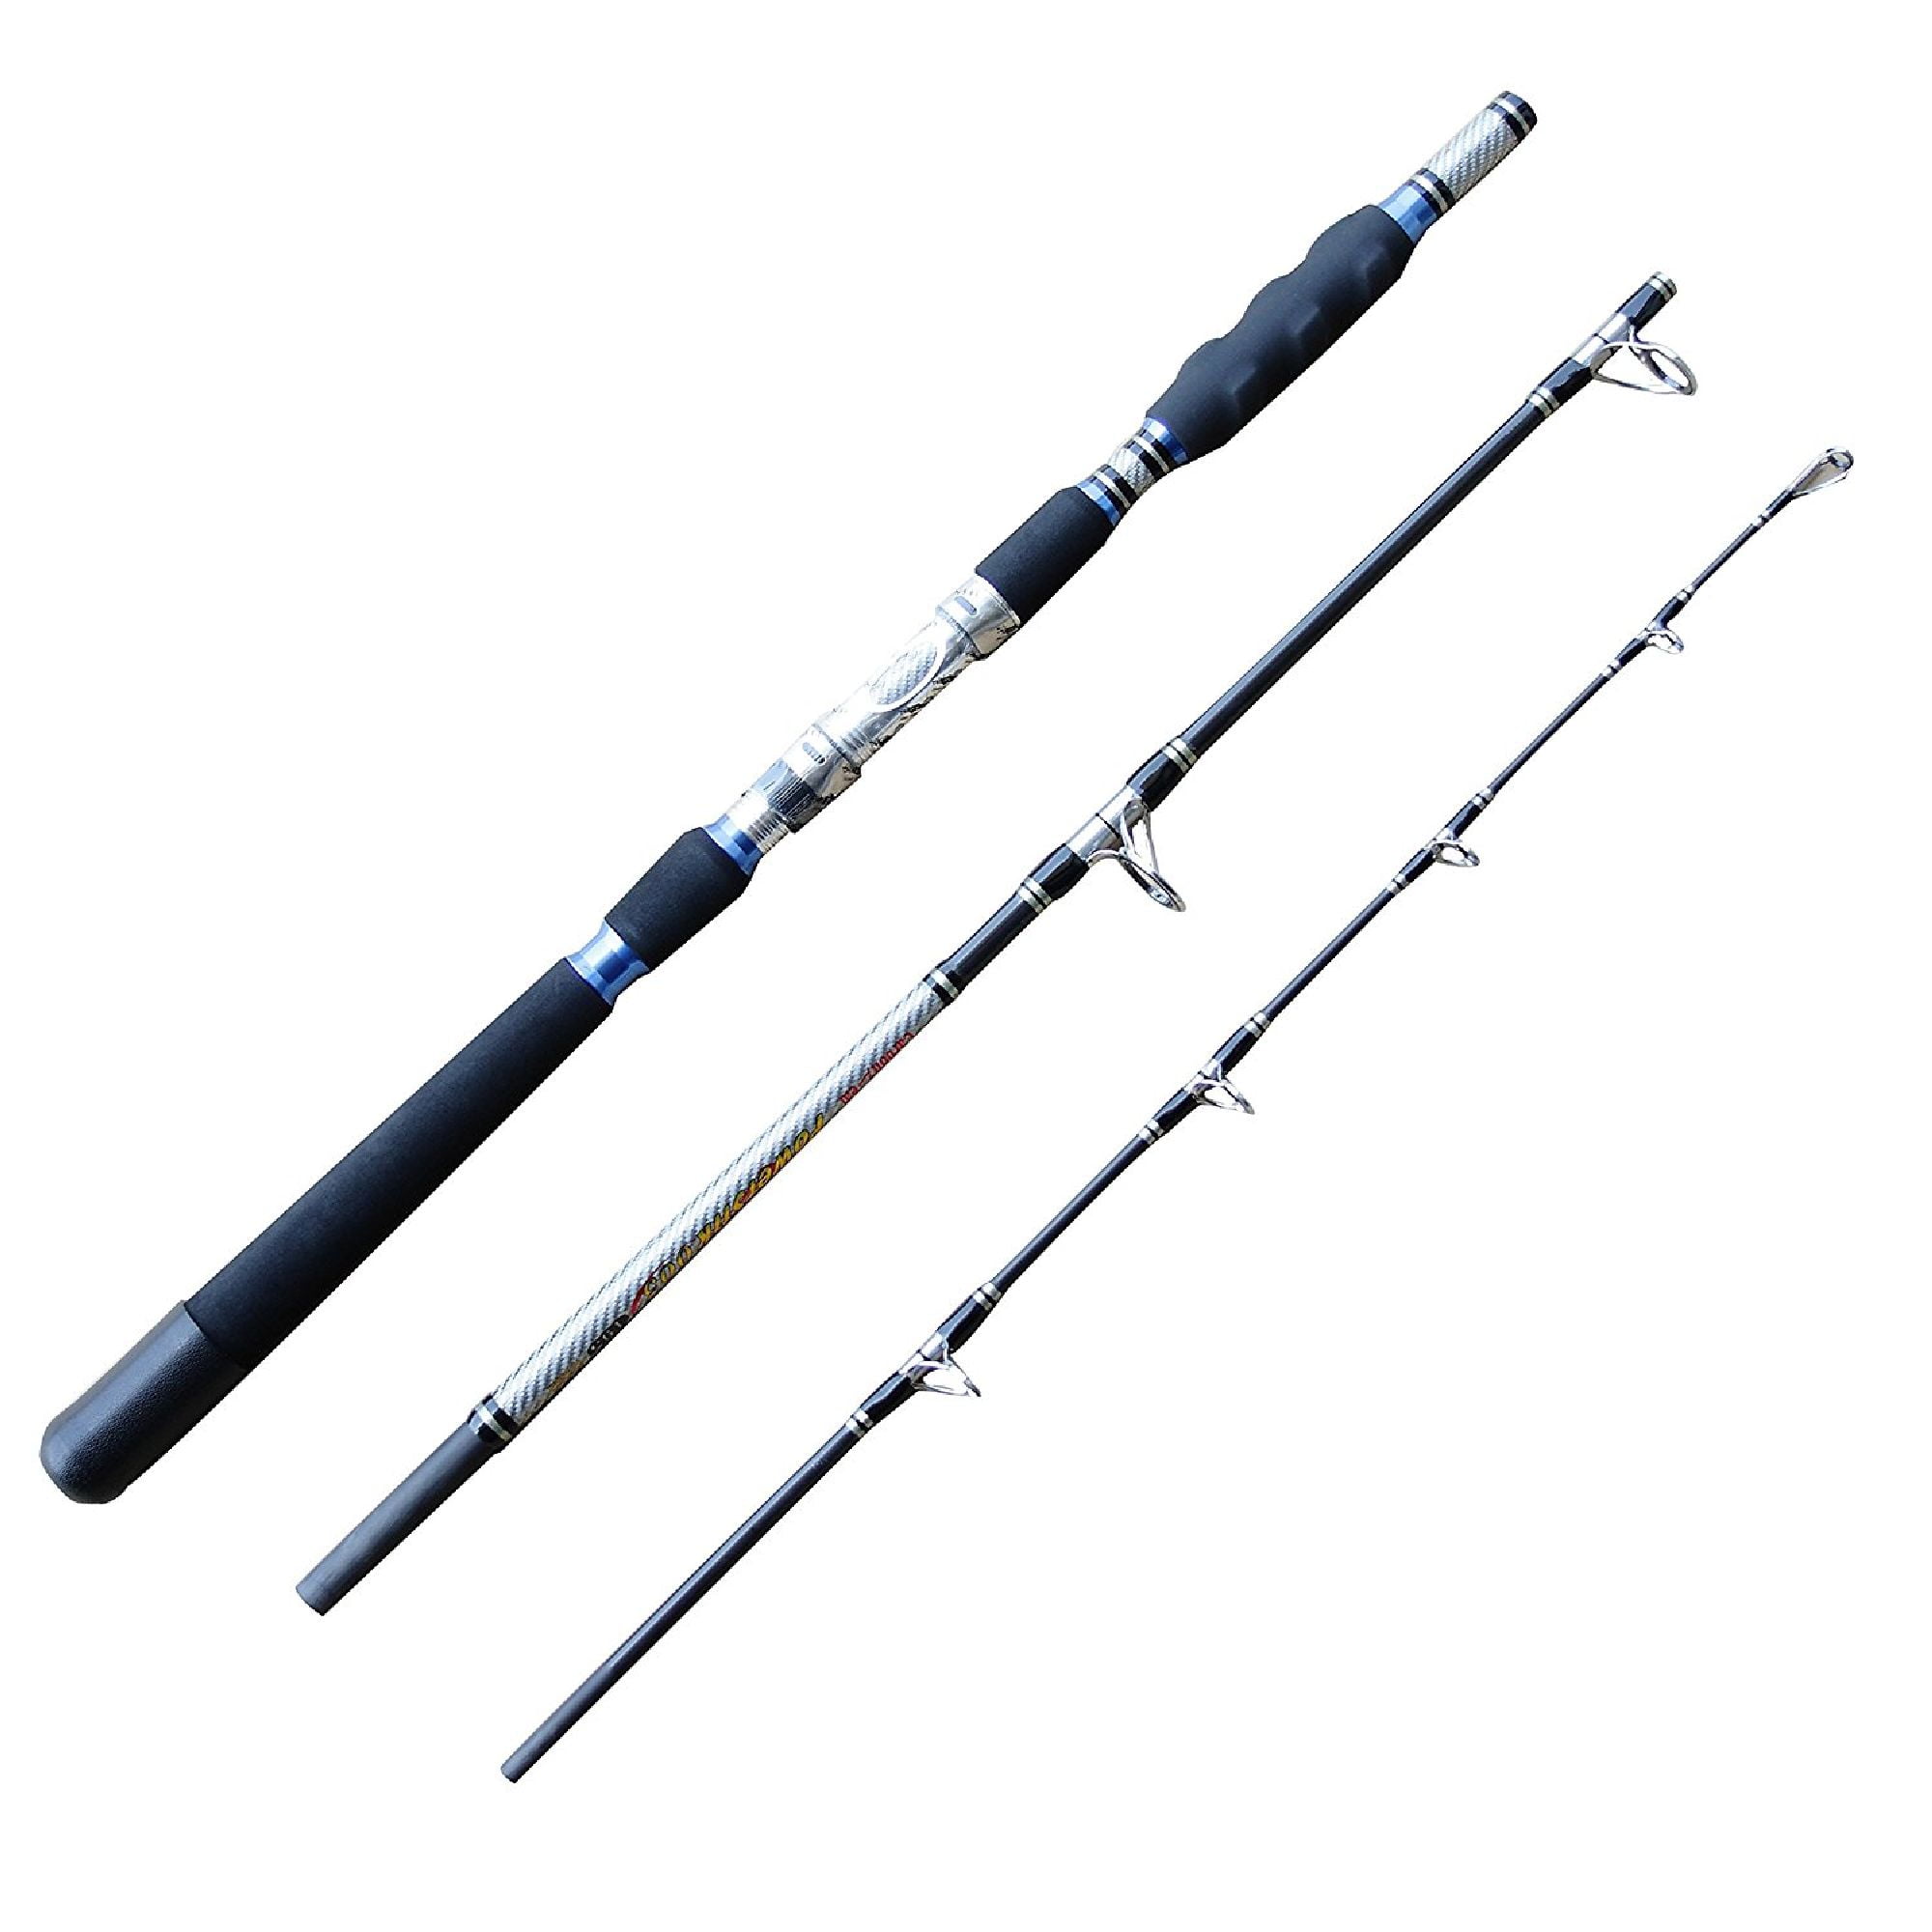 11s 3 Floating sarfix 4x12 with astina Carbon Fishing Rod Fixed 